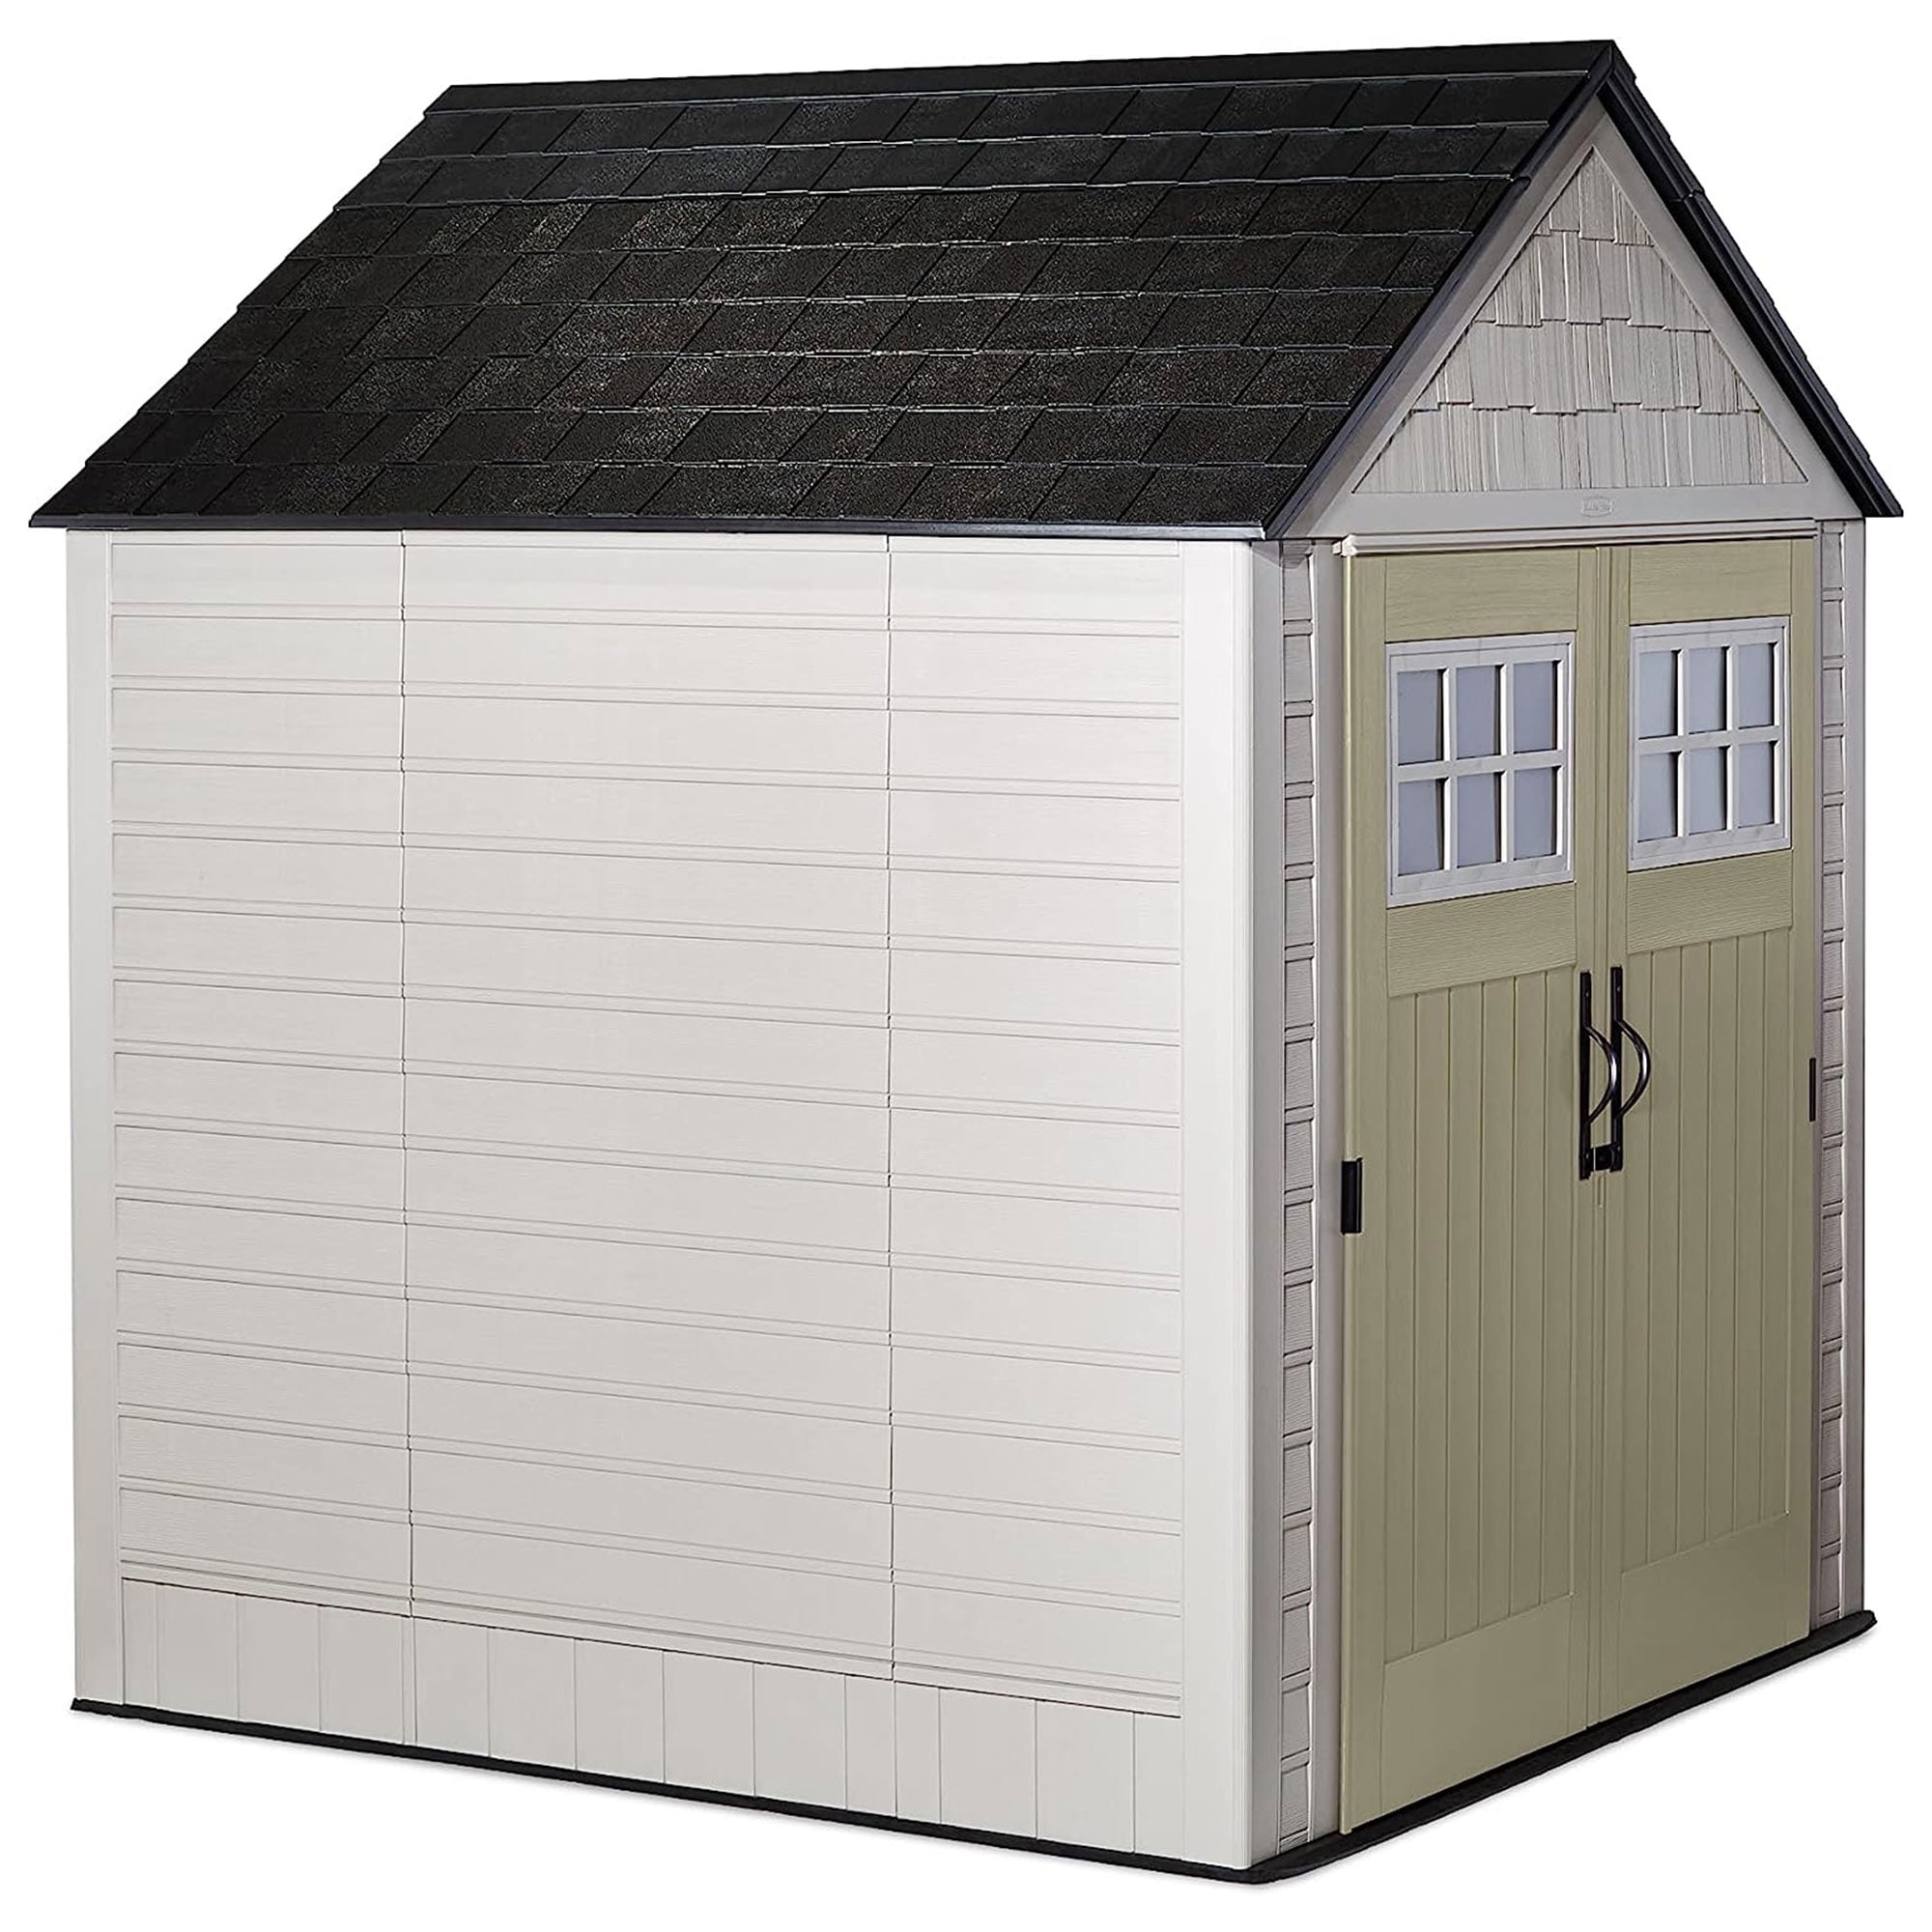 10 Best Rubbermaid Shed ideas  shed storage, rubbermaid shed, shed